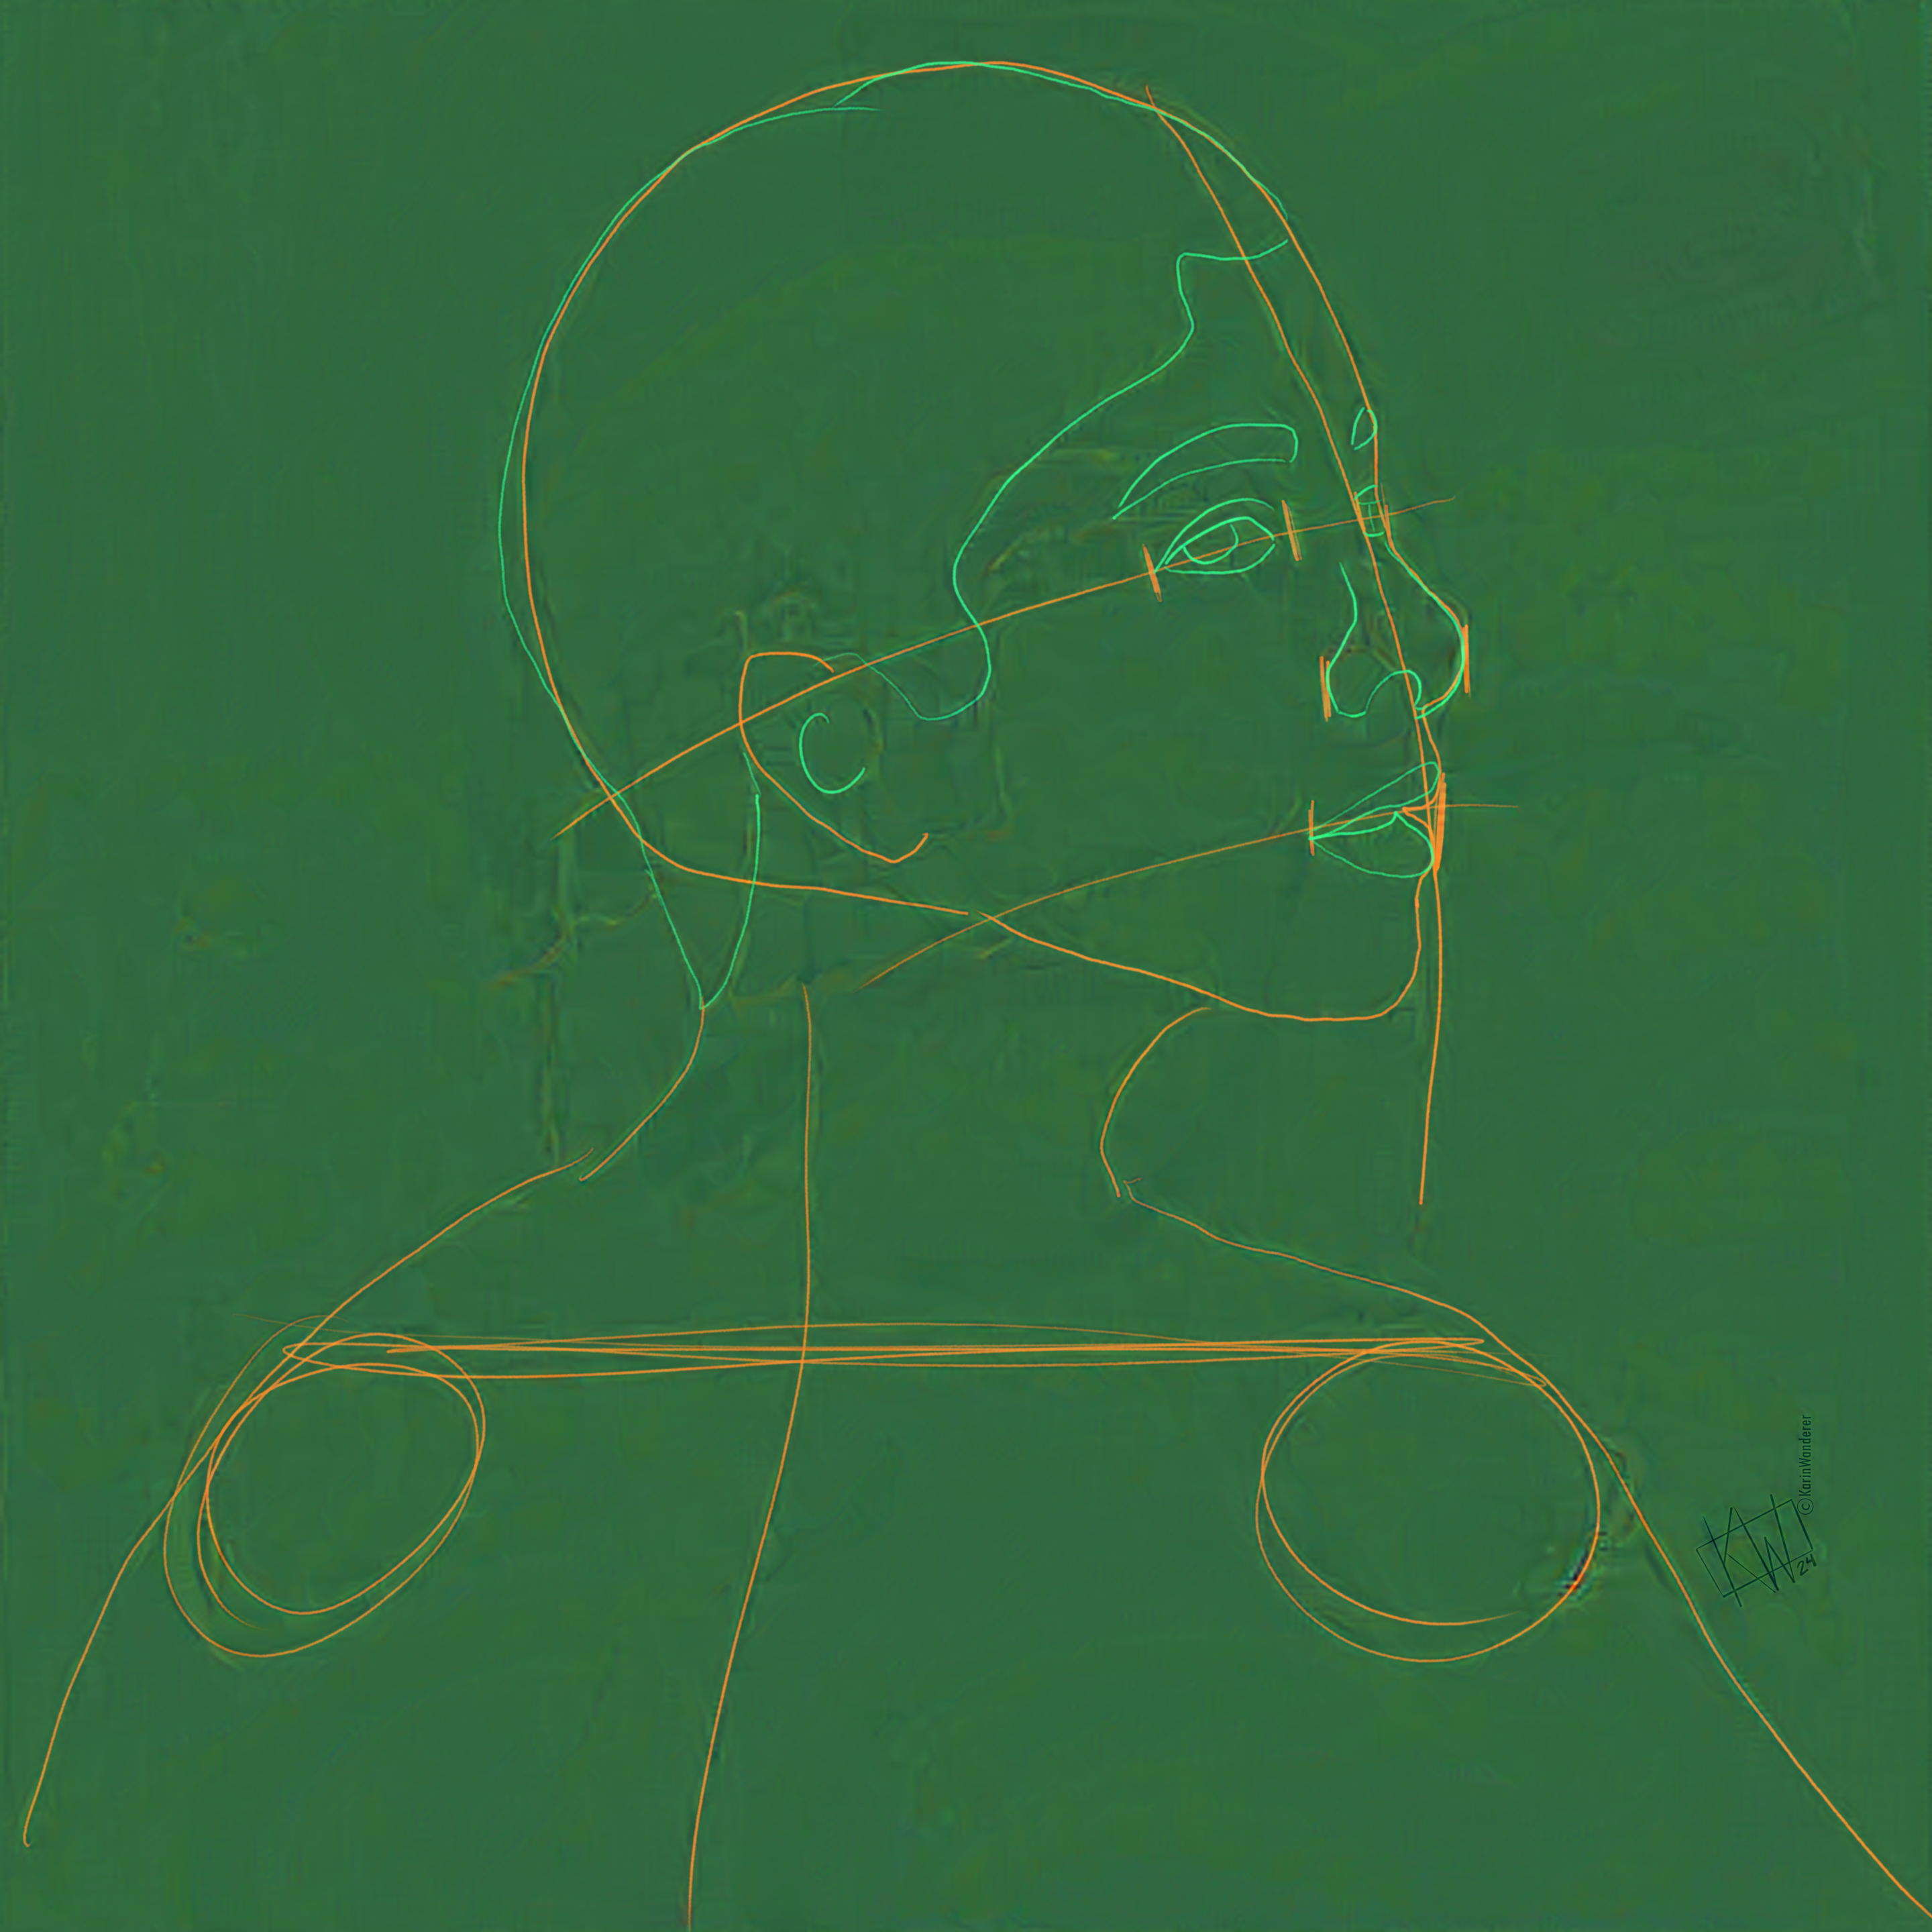 Wireframe outline of a woman facing to the side. The body lines are drawn in orange, the face is roughed in using green.